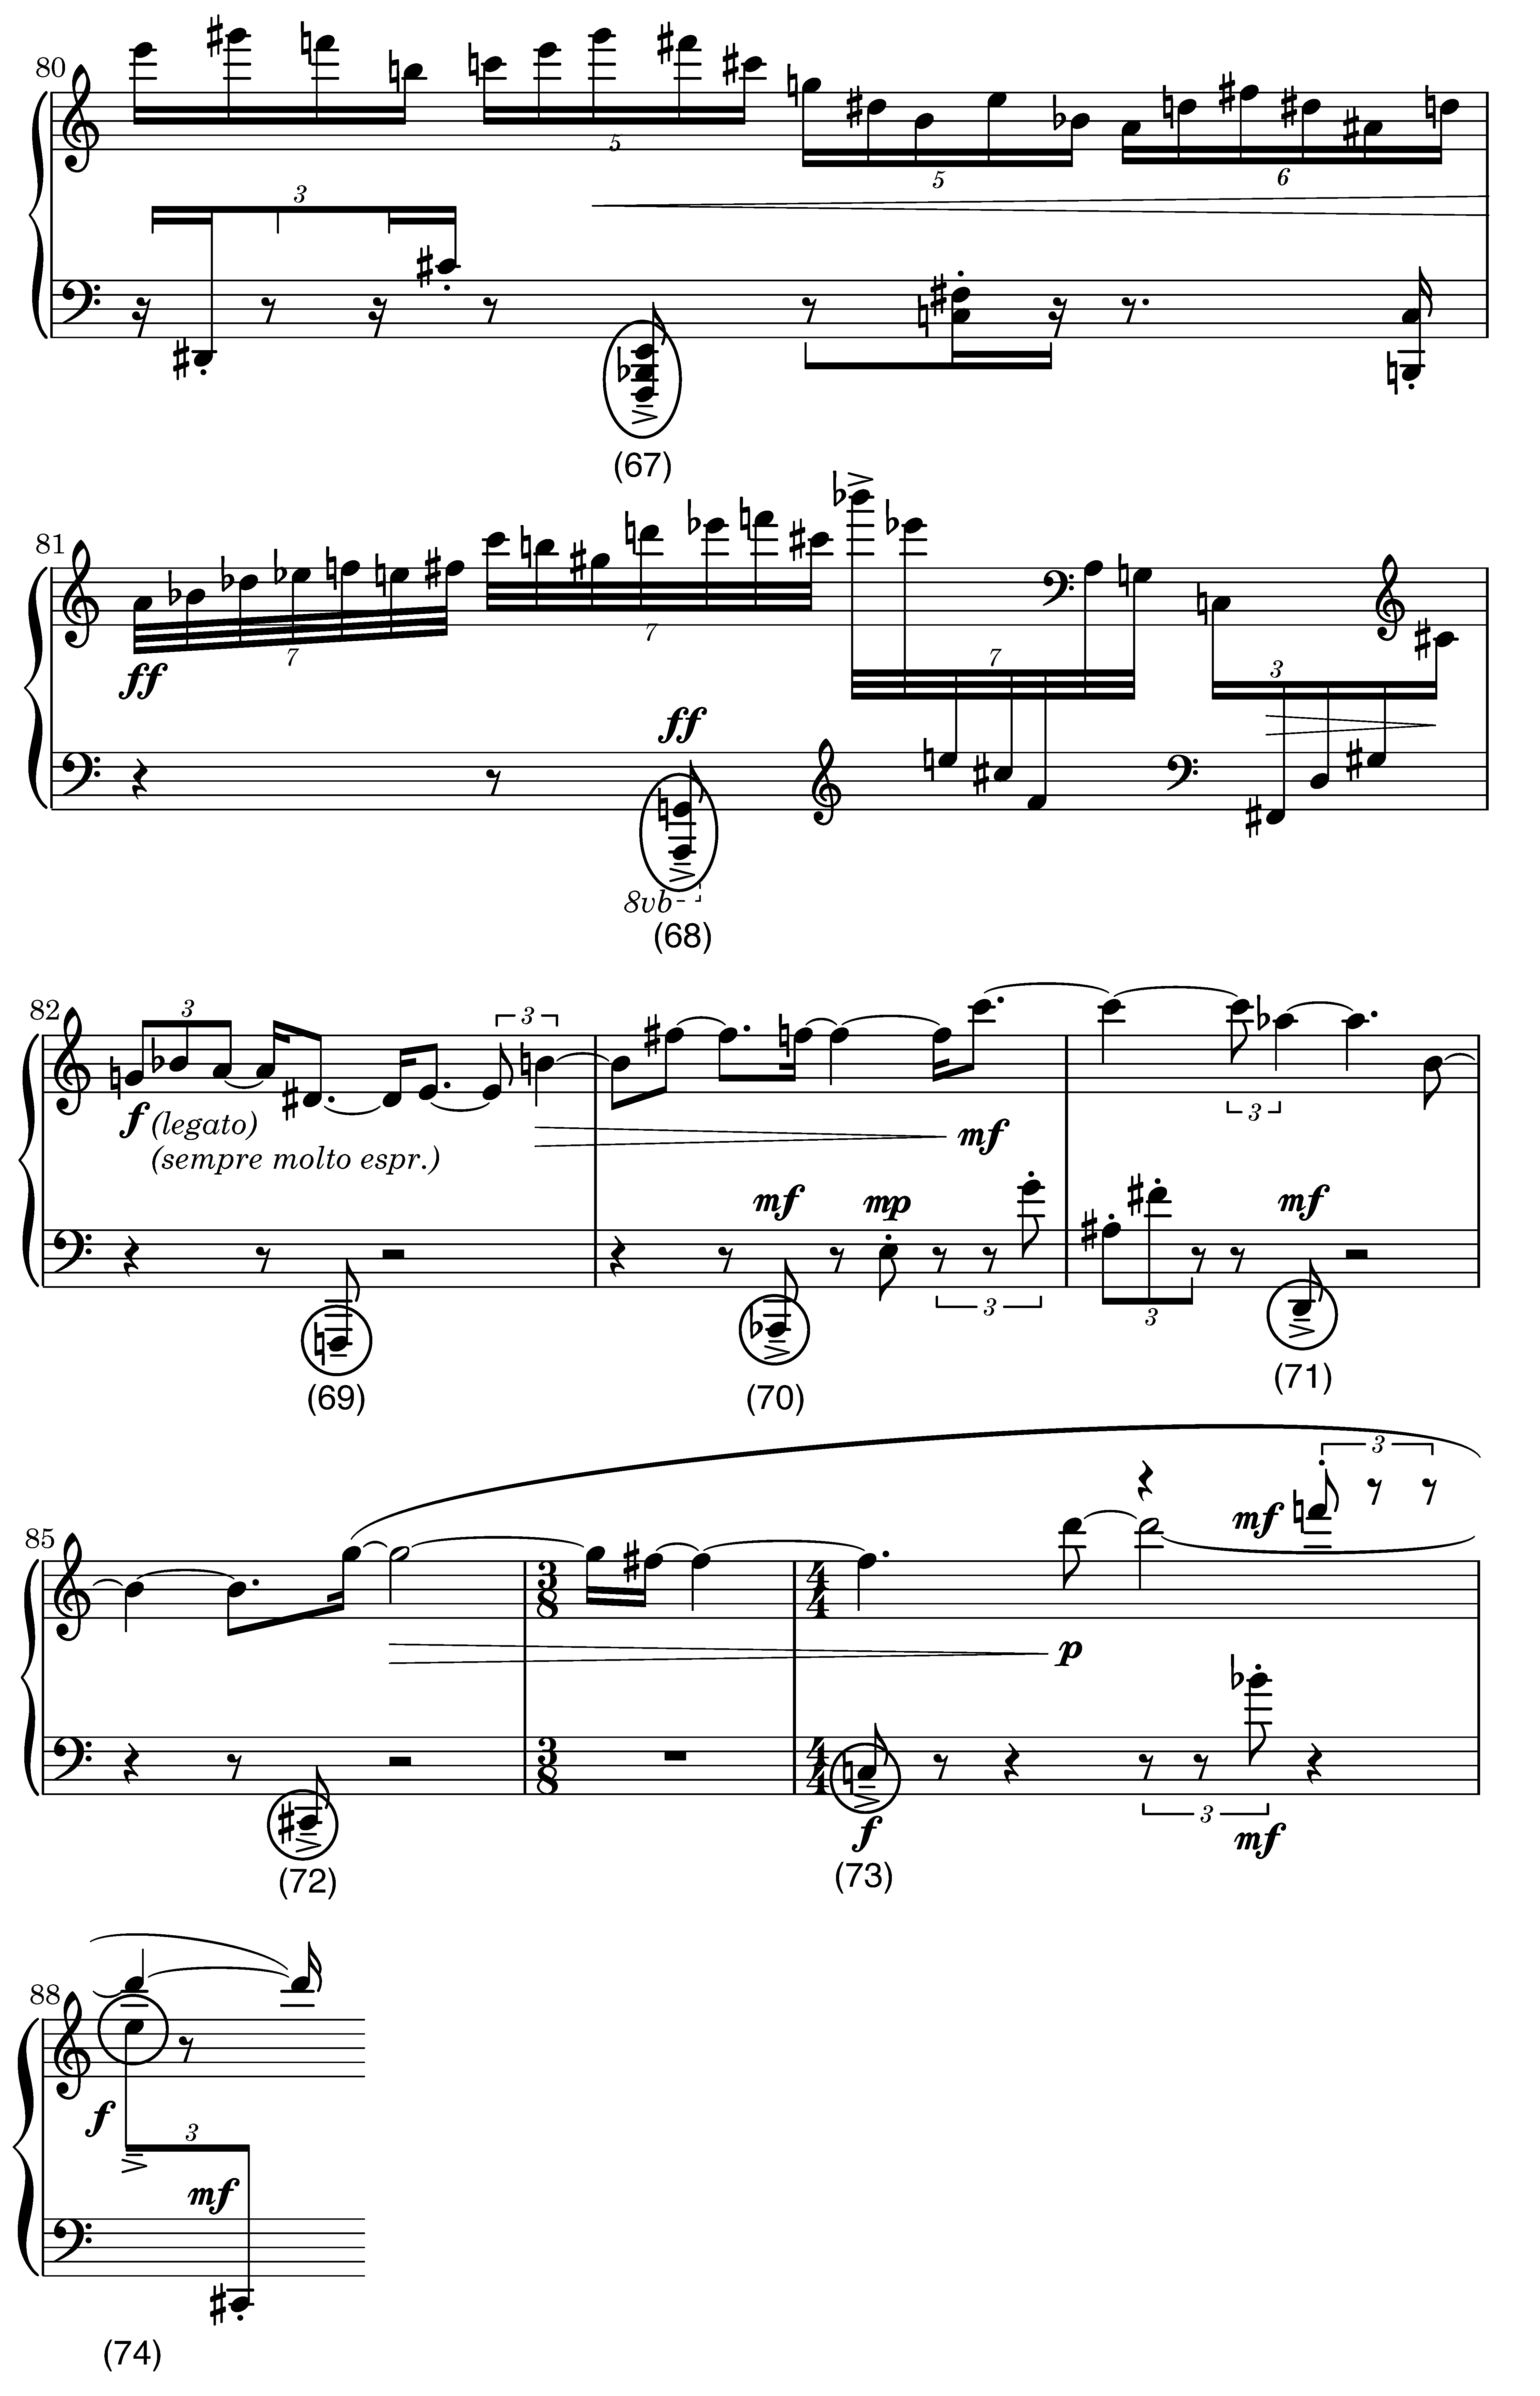 Musical notation for Elliott Carter's 90+ for piano (1994), mm. 80 to 88, fifth sixteenth note